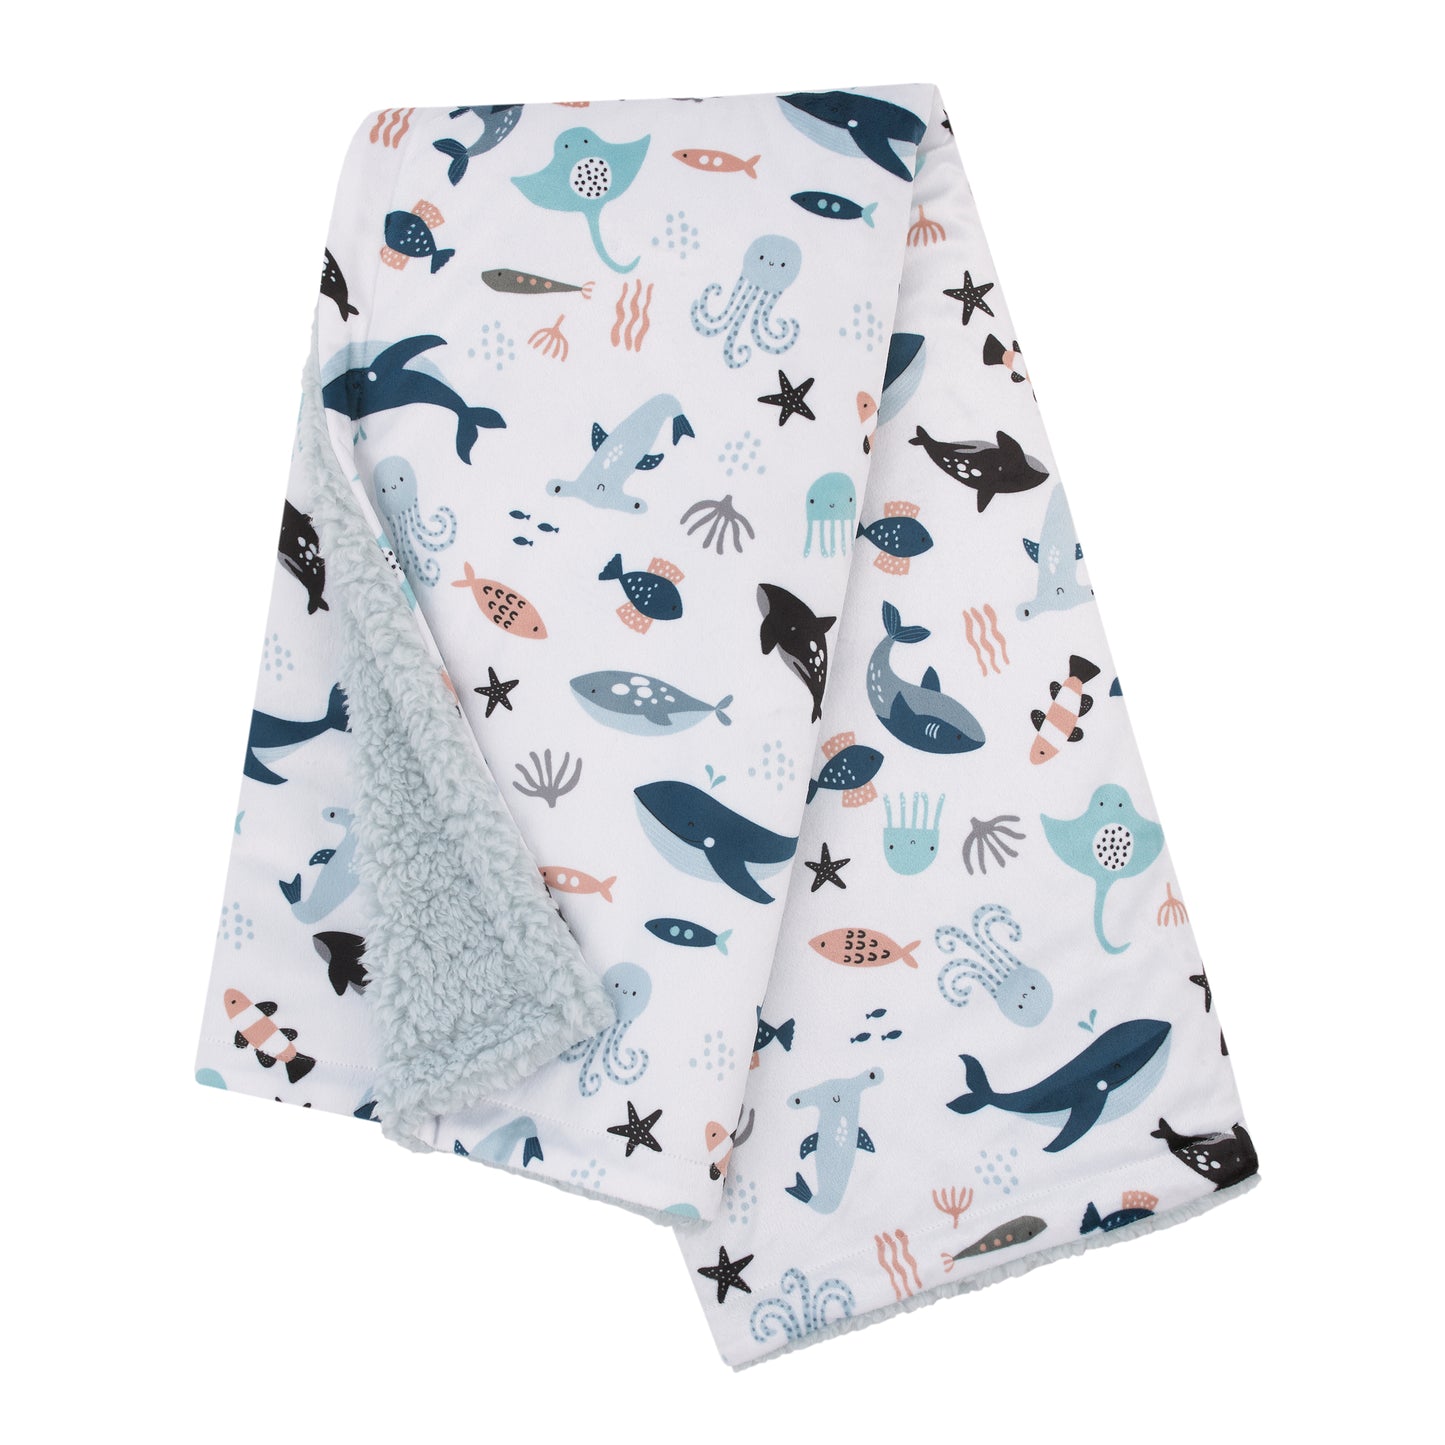 NoJo Explore Dream Discover Light Blue, Navy, Gray and Coral Super Soft Sherpa Baby Blanket